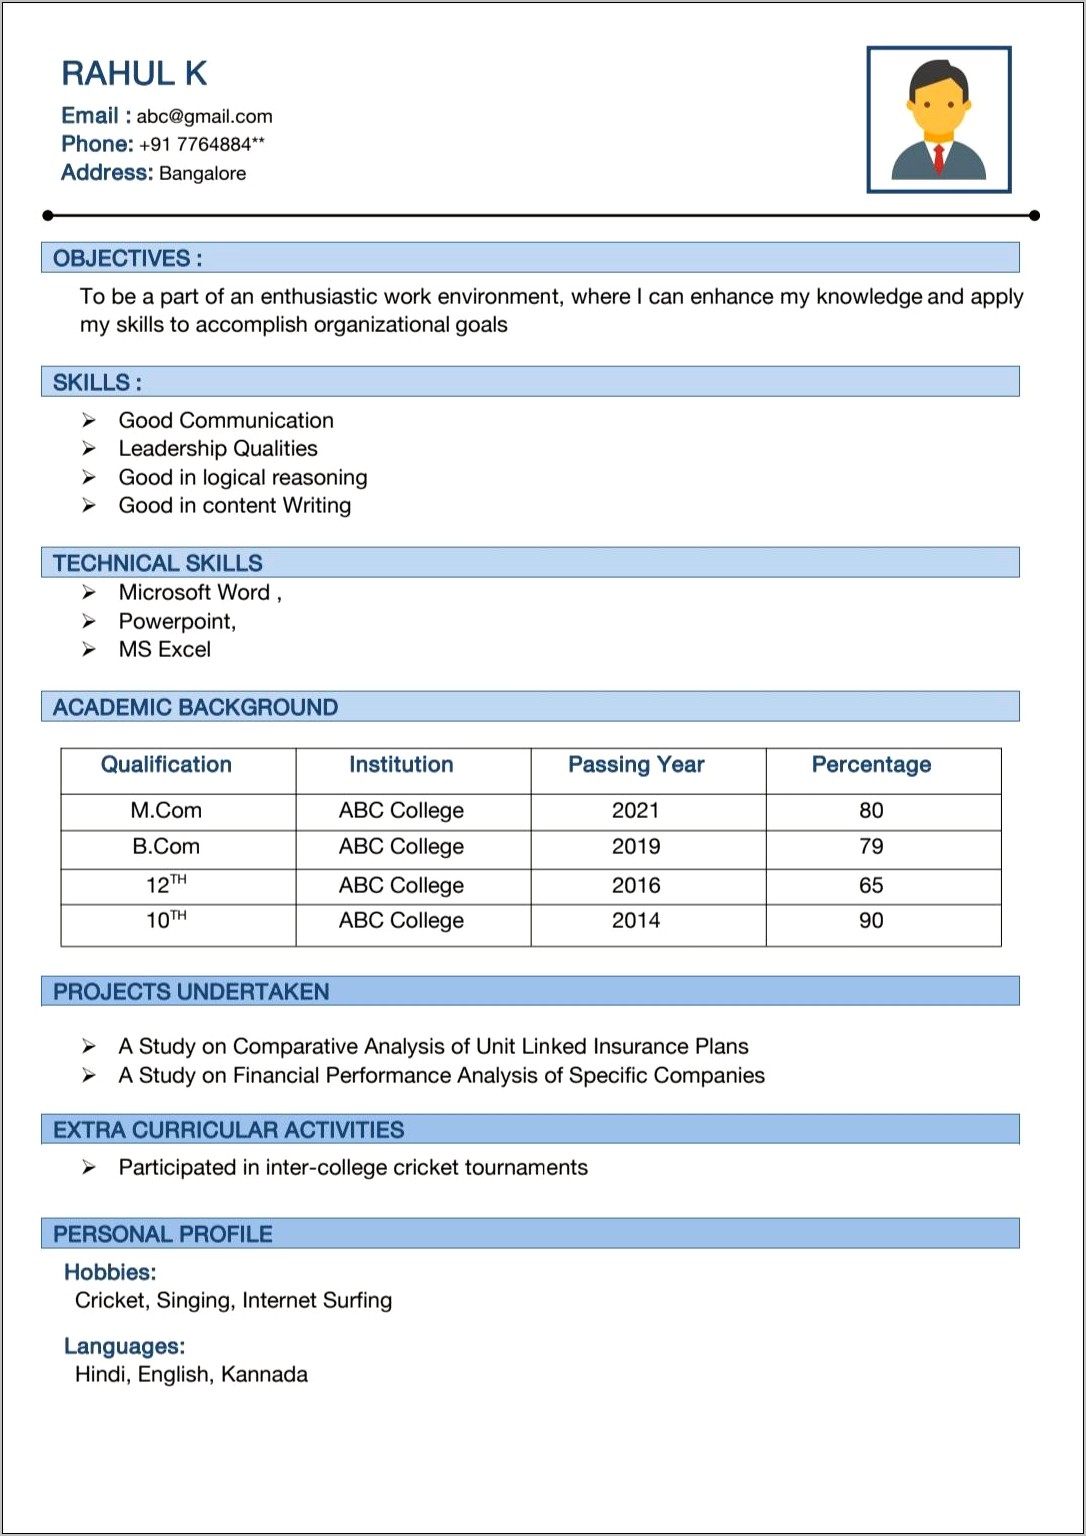 Resume Format For Bcom Freshers In Word